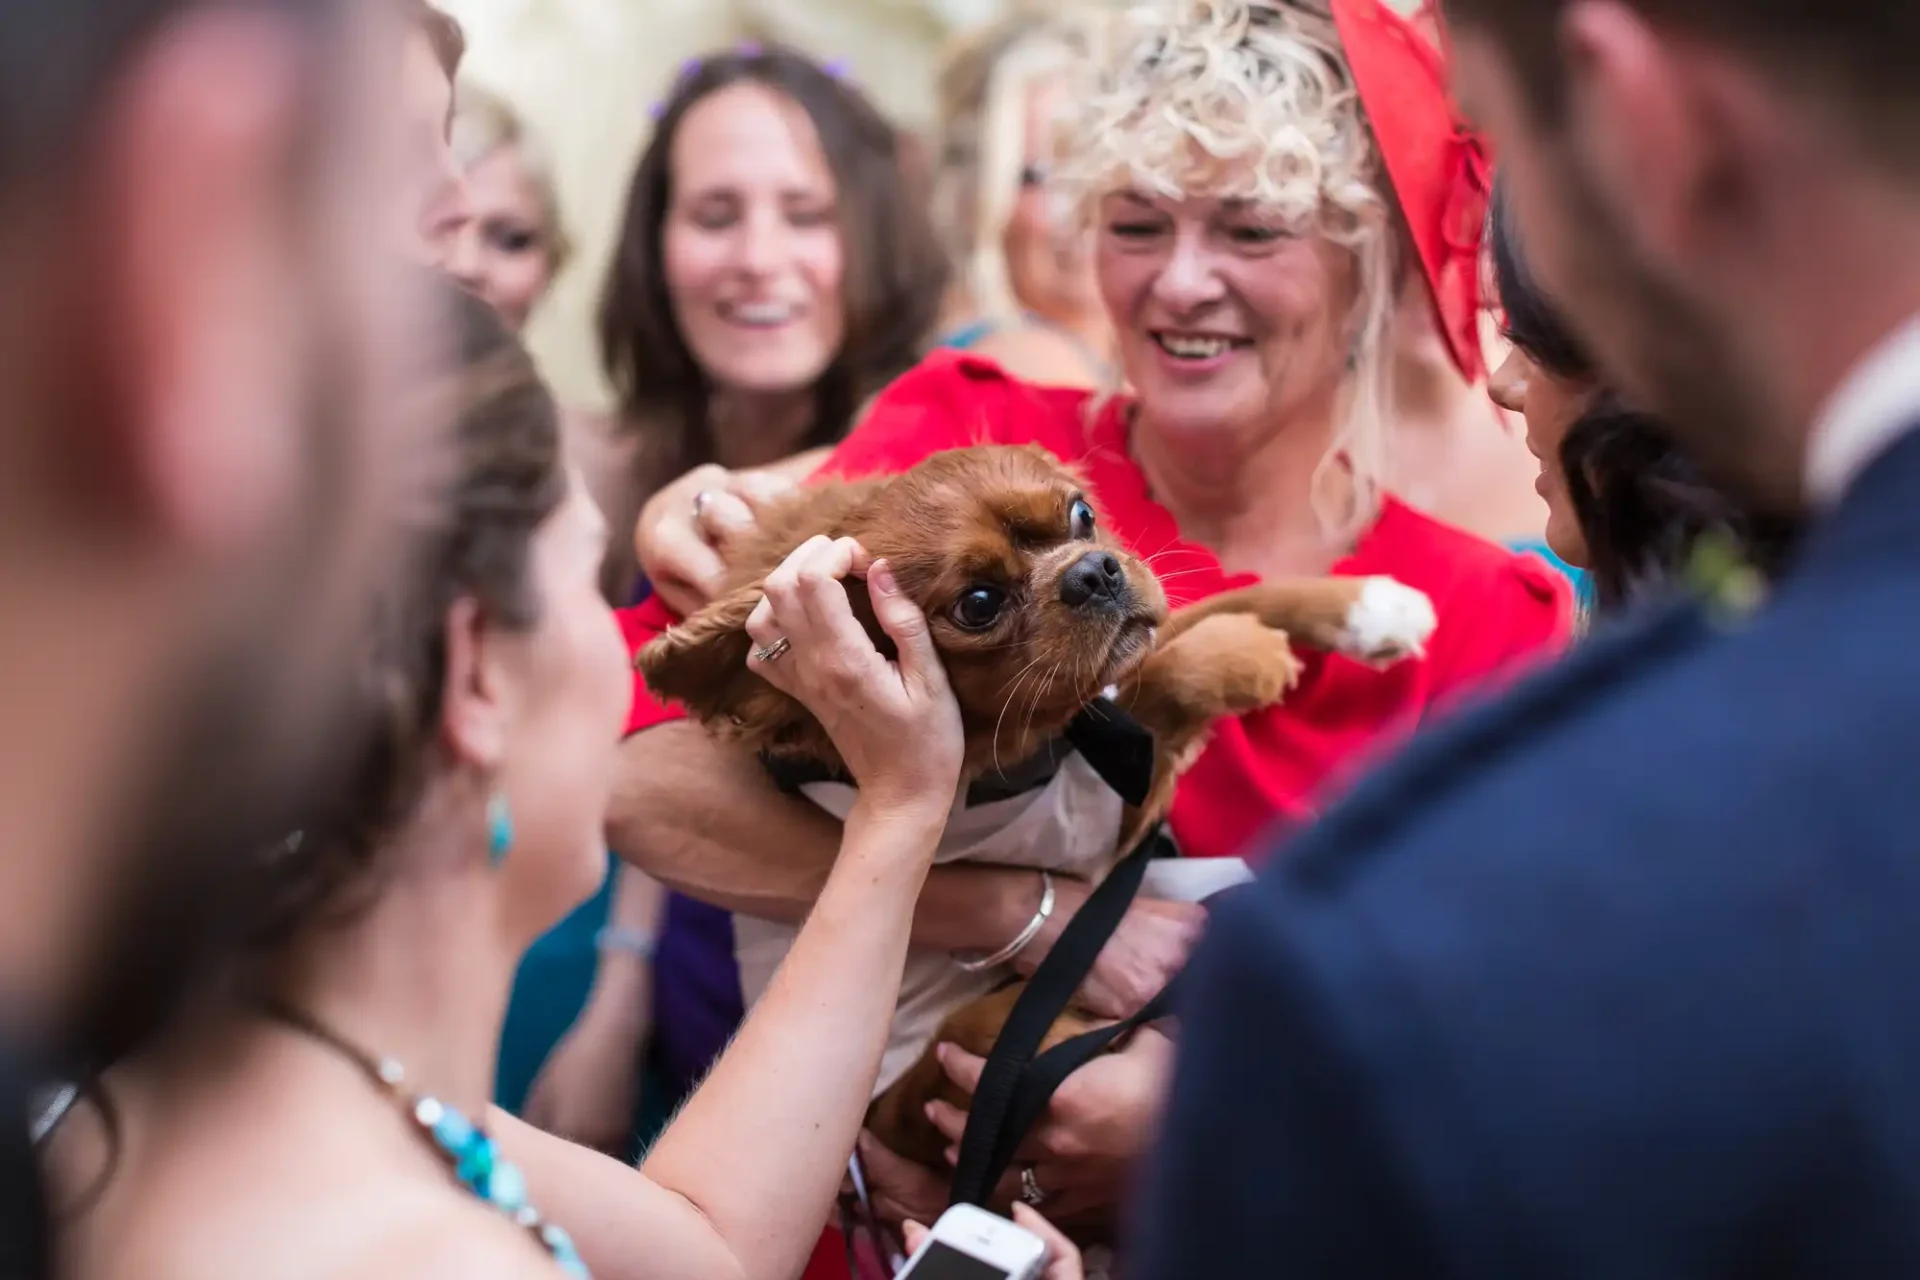 A small brown and white dog is held and petted by a smiling woman in a red hat at a crowded event, surrounded by other guests.